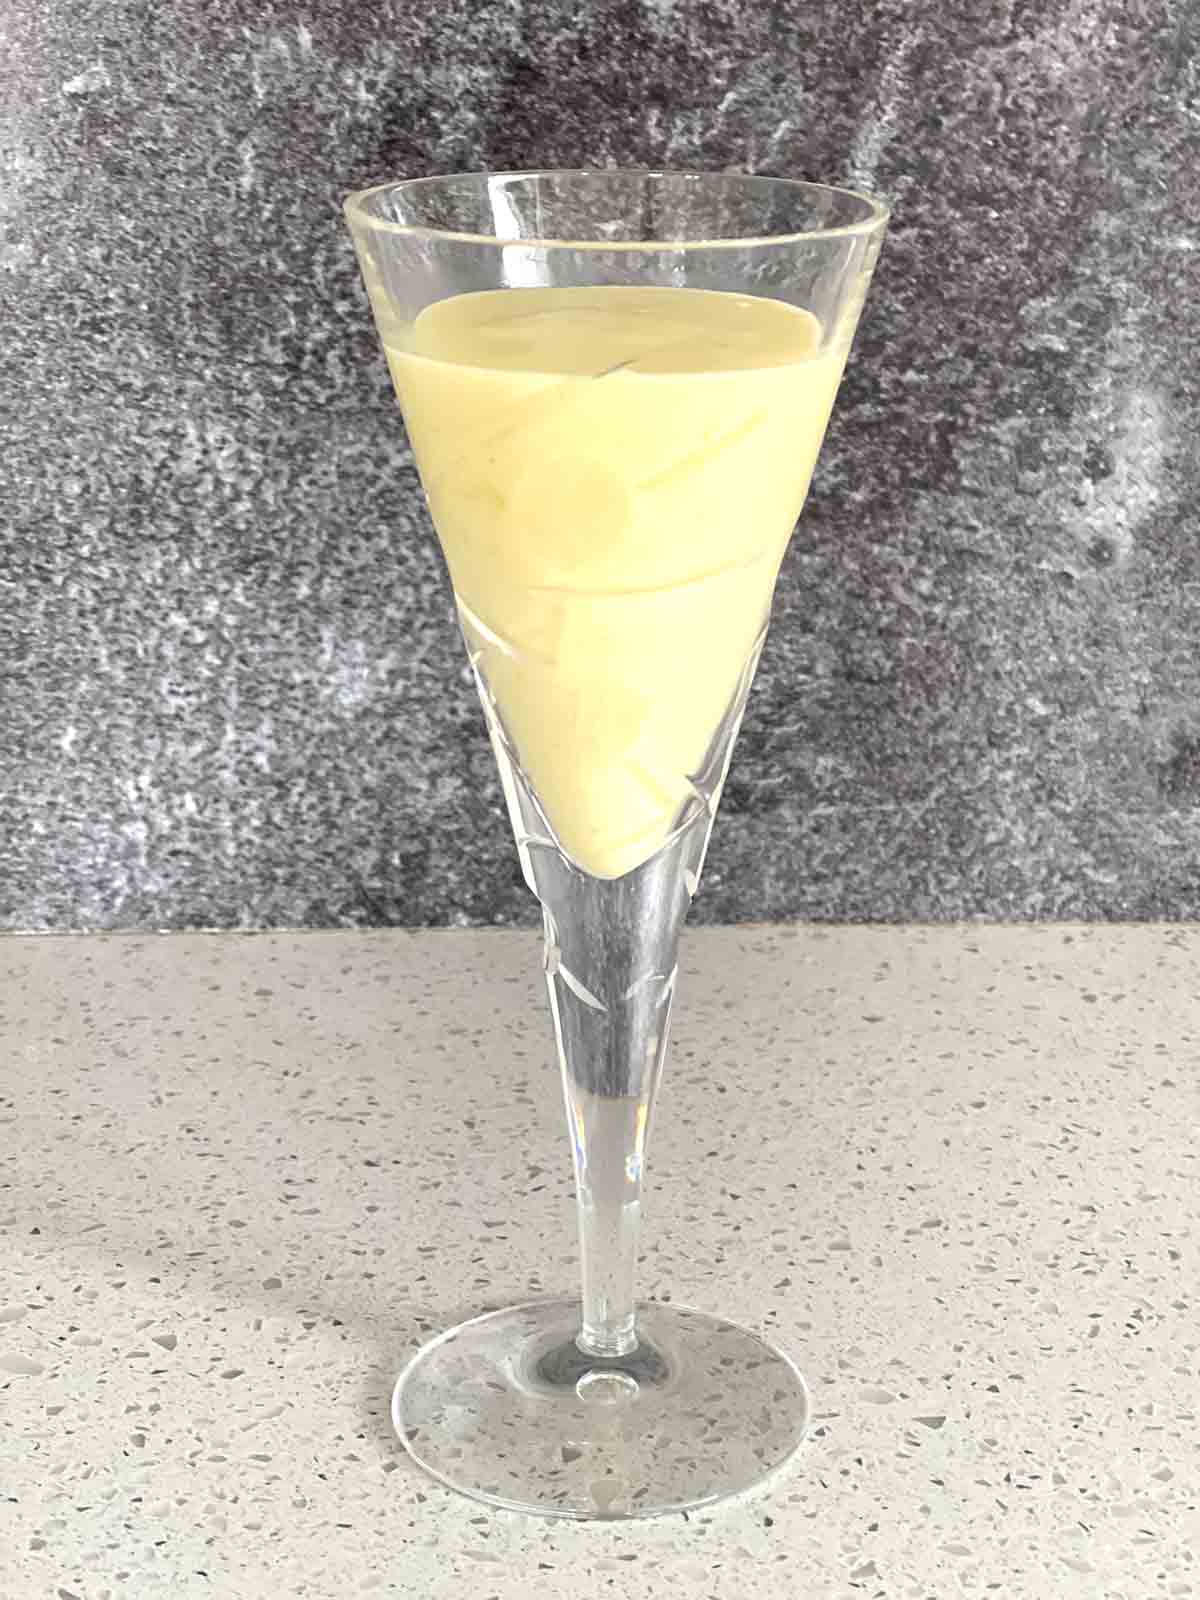 custard mixed with cream in a glass.